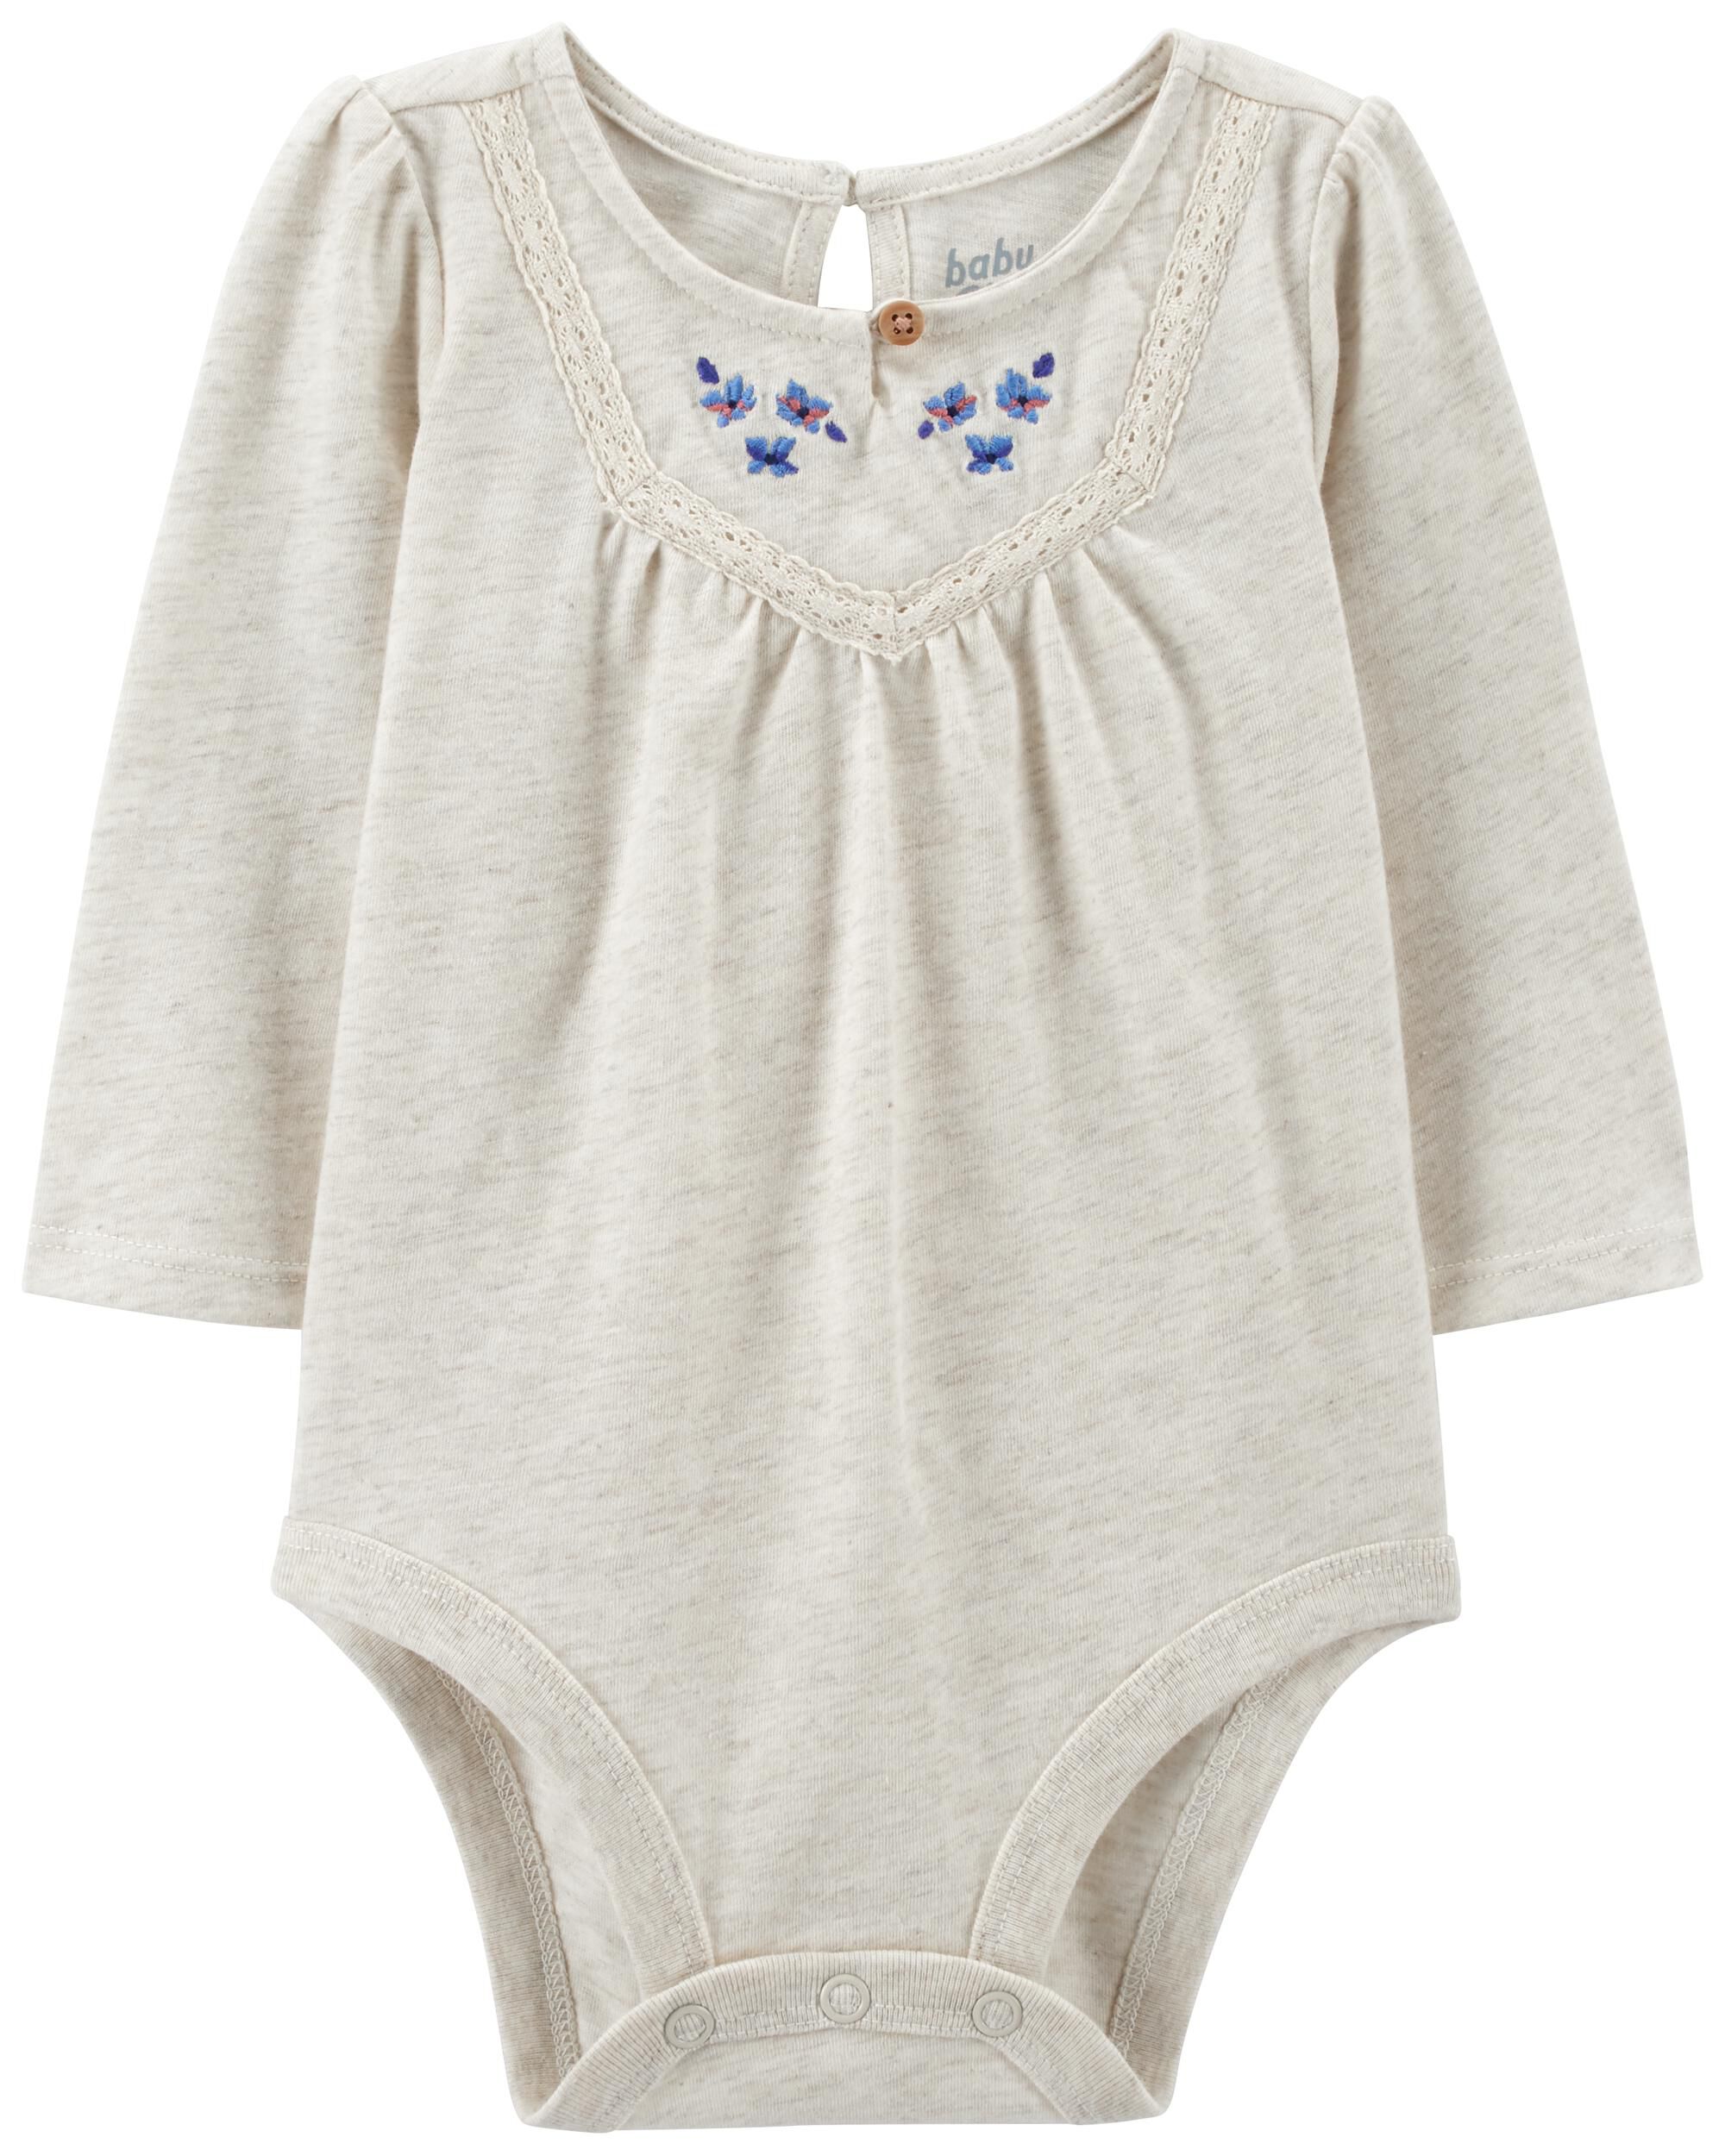 Oatmeal Embroidered Floral Jersey Bodysuit   carters.com